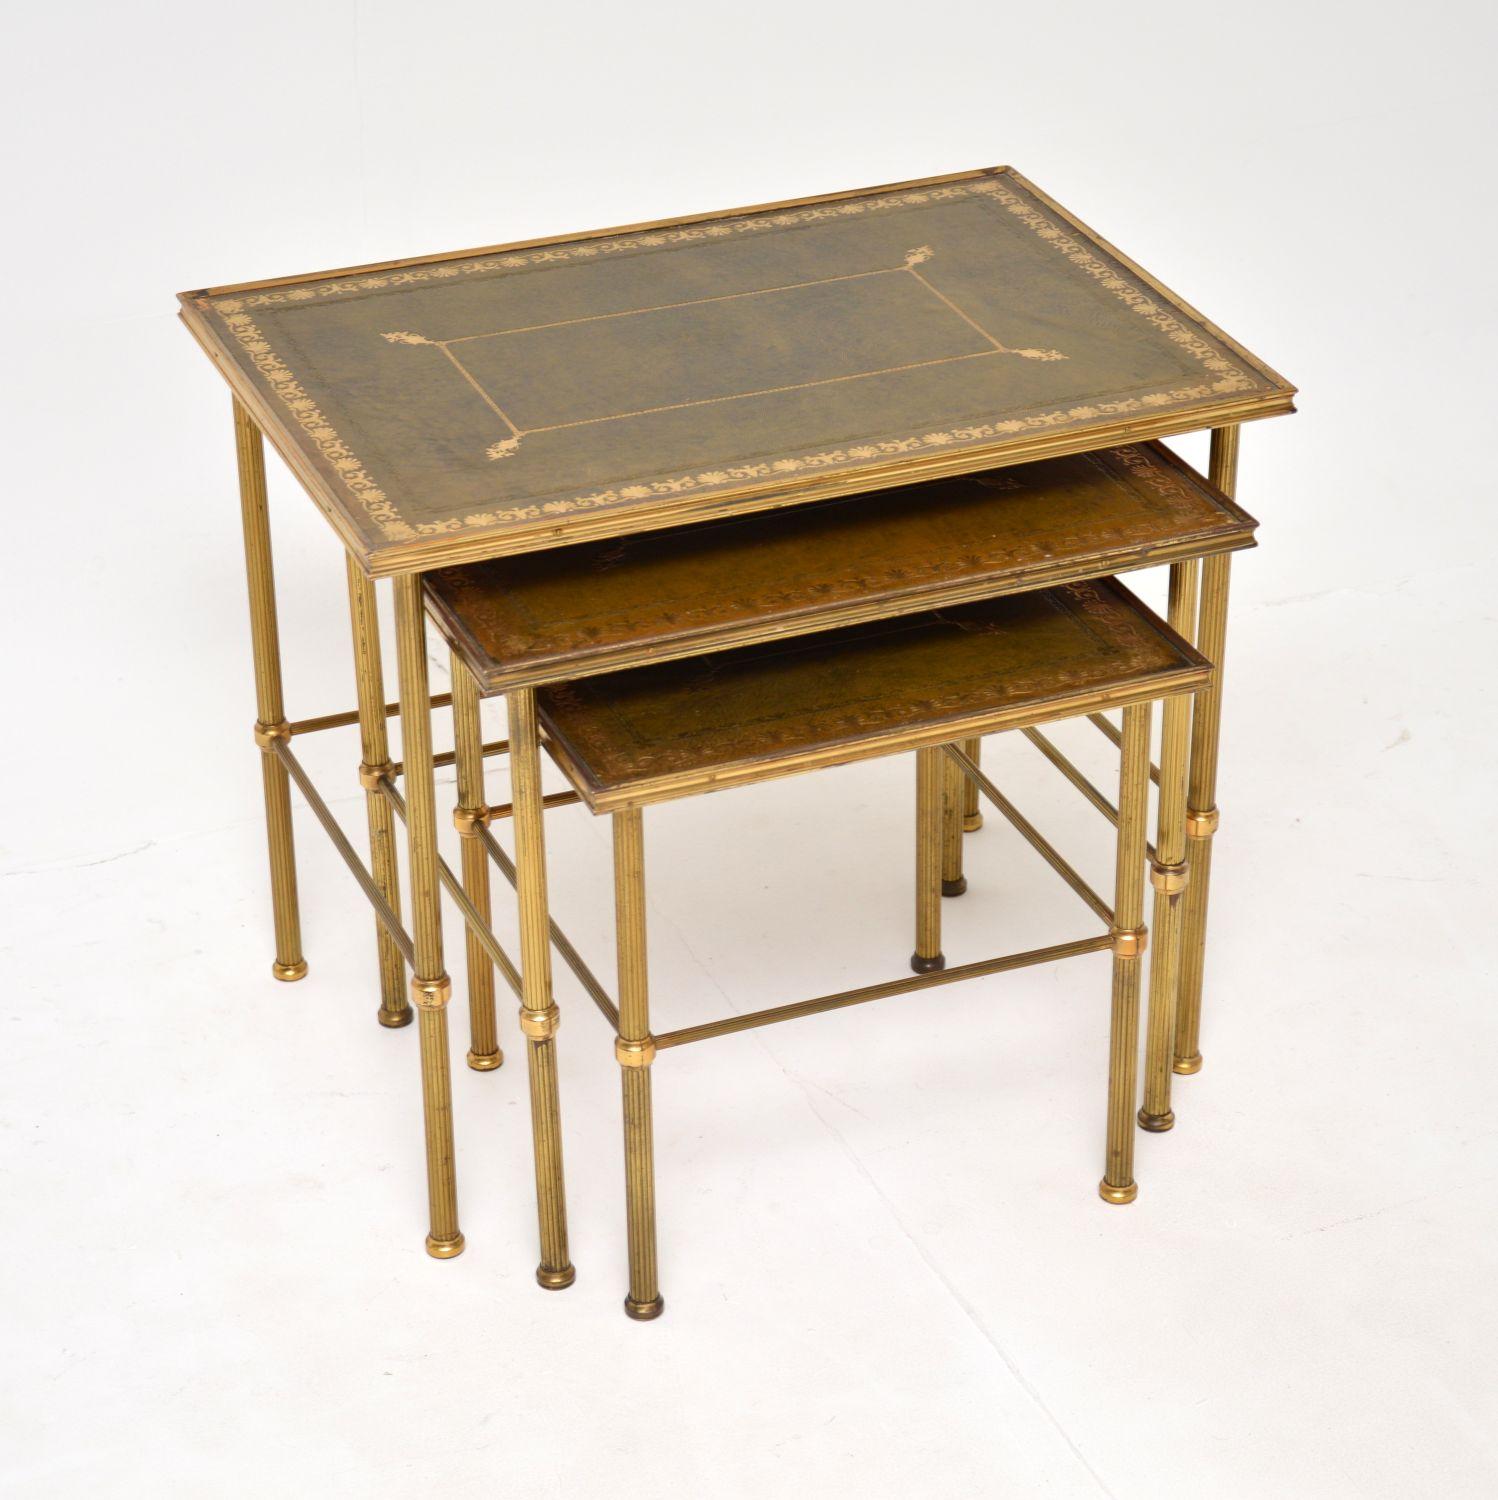 A fantastic antique nest of tables in solid brass with leather tops. These were likely made in France, they date from around the 1930-50’s.

They are of super quality and it in unusual to see a model like this with such lovely tooled leather